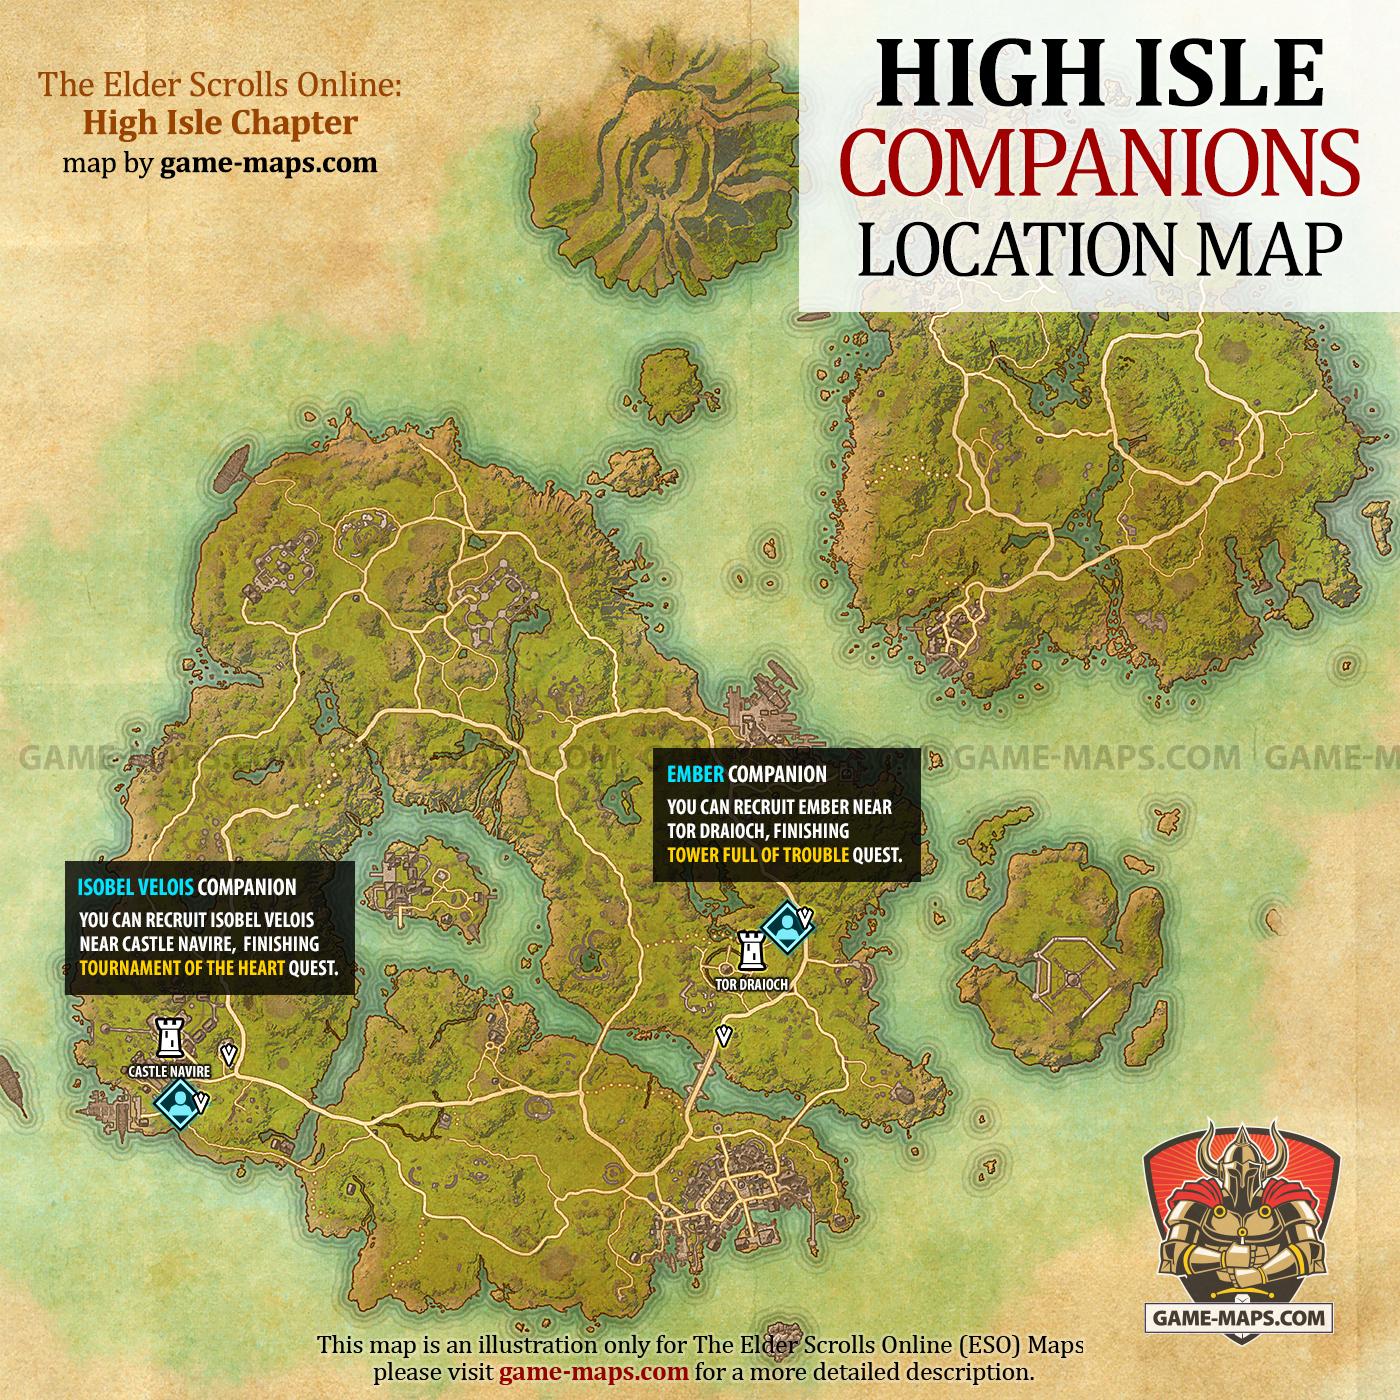 Companions Location Map in High Isle for The Elder Scrolls Online (ESO) - The Elder Scrolls Online (ESO)